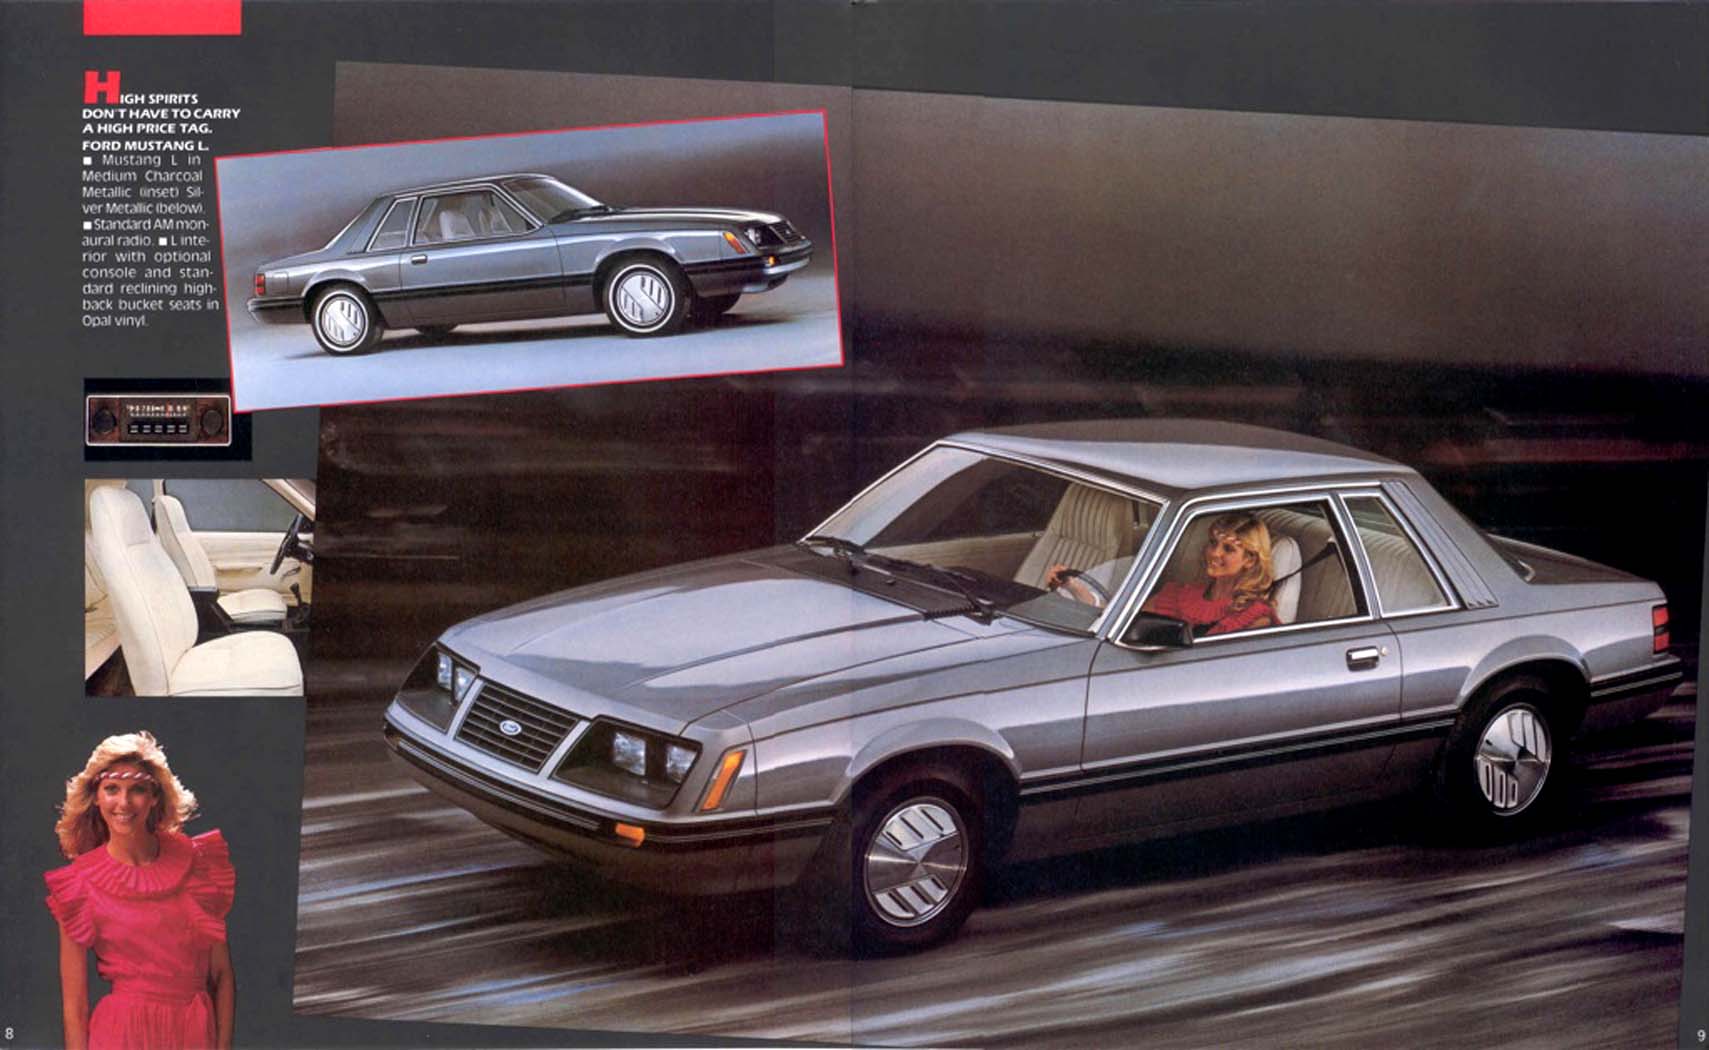 1983_Ford_Mustang-08-09